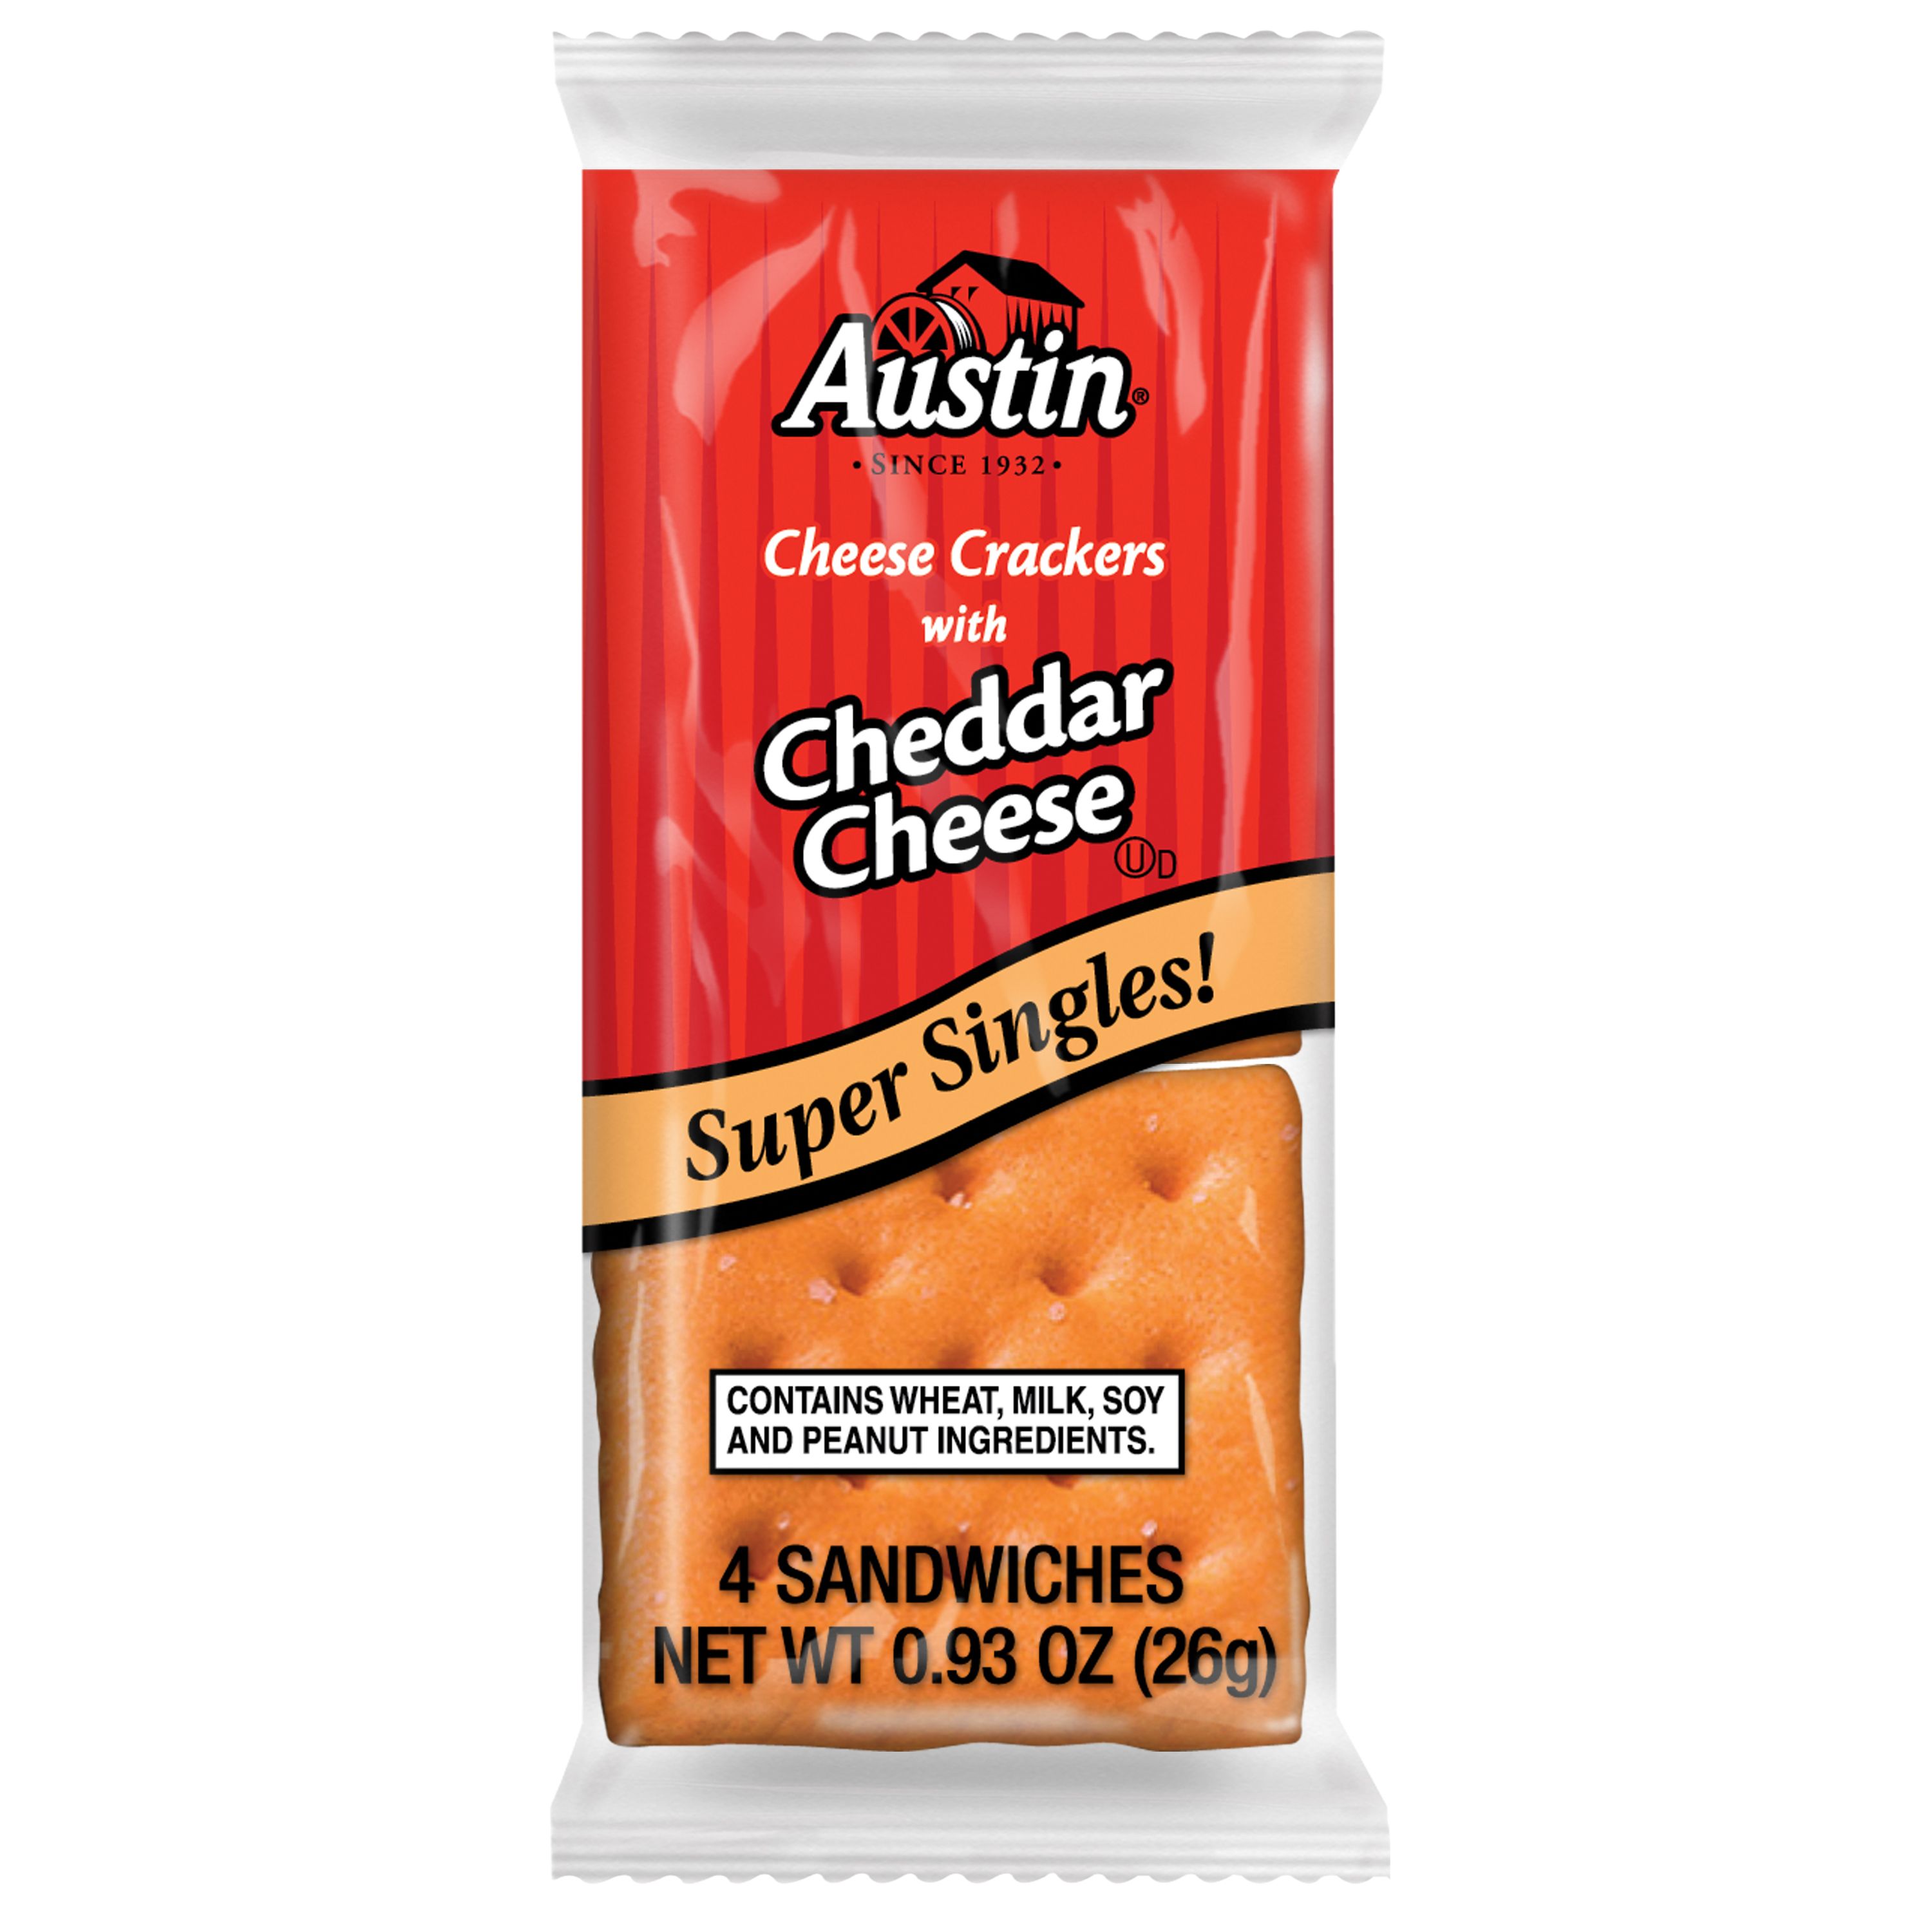 Austin Cheese Crackers with Cheddar Cheese